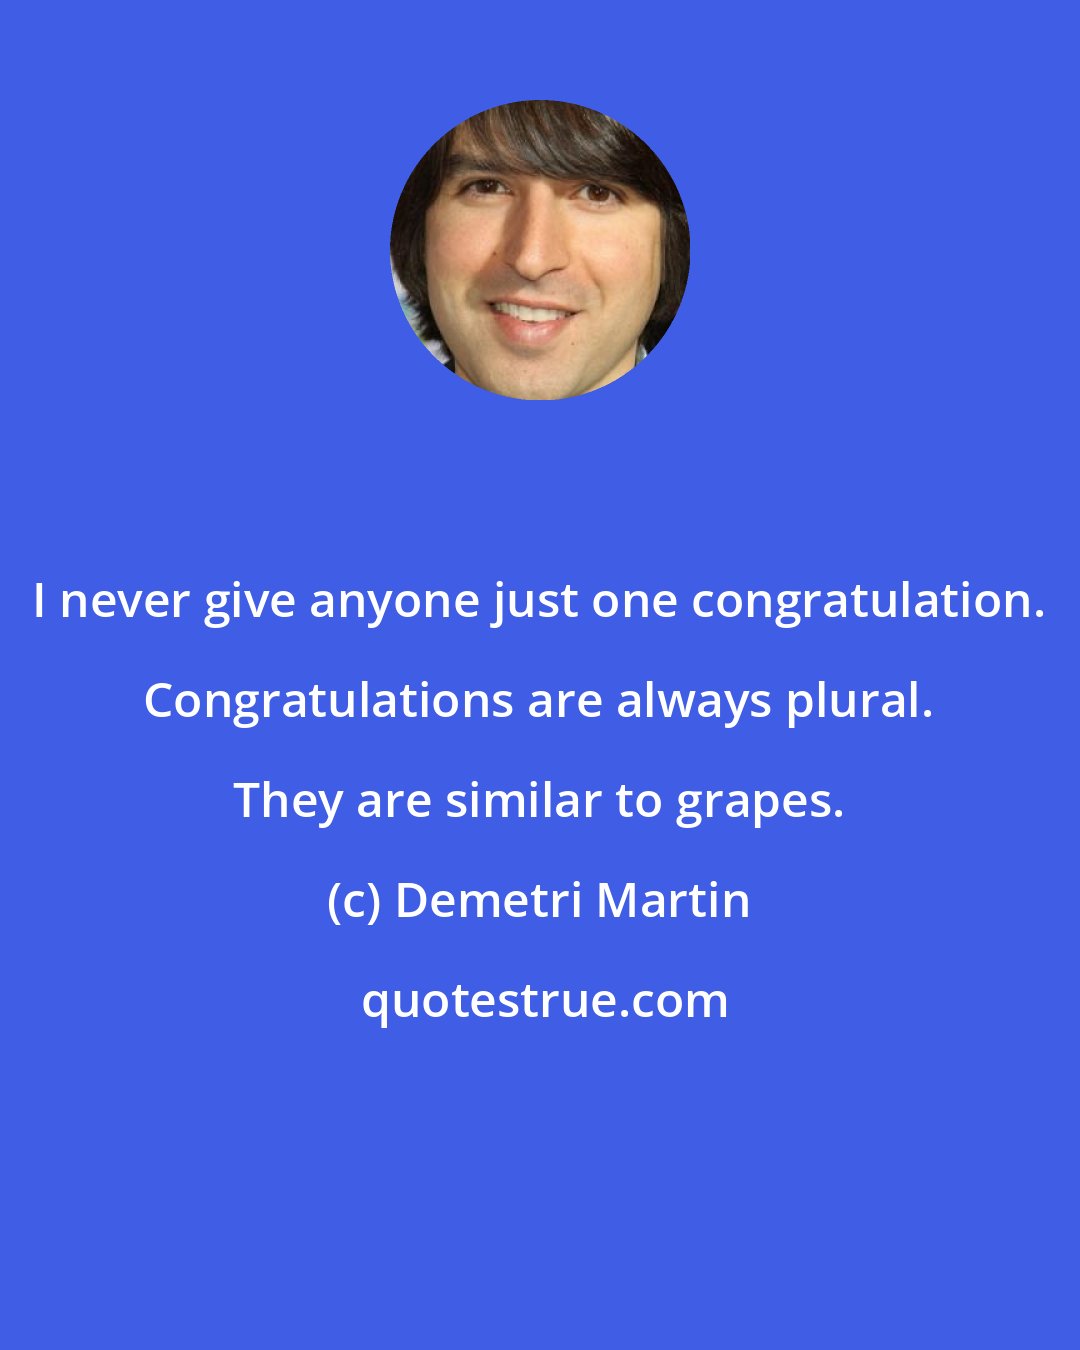 Demetri Martin: I never give anyone just one congratulation. Congratulations are always plural. They are similar to grapes.